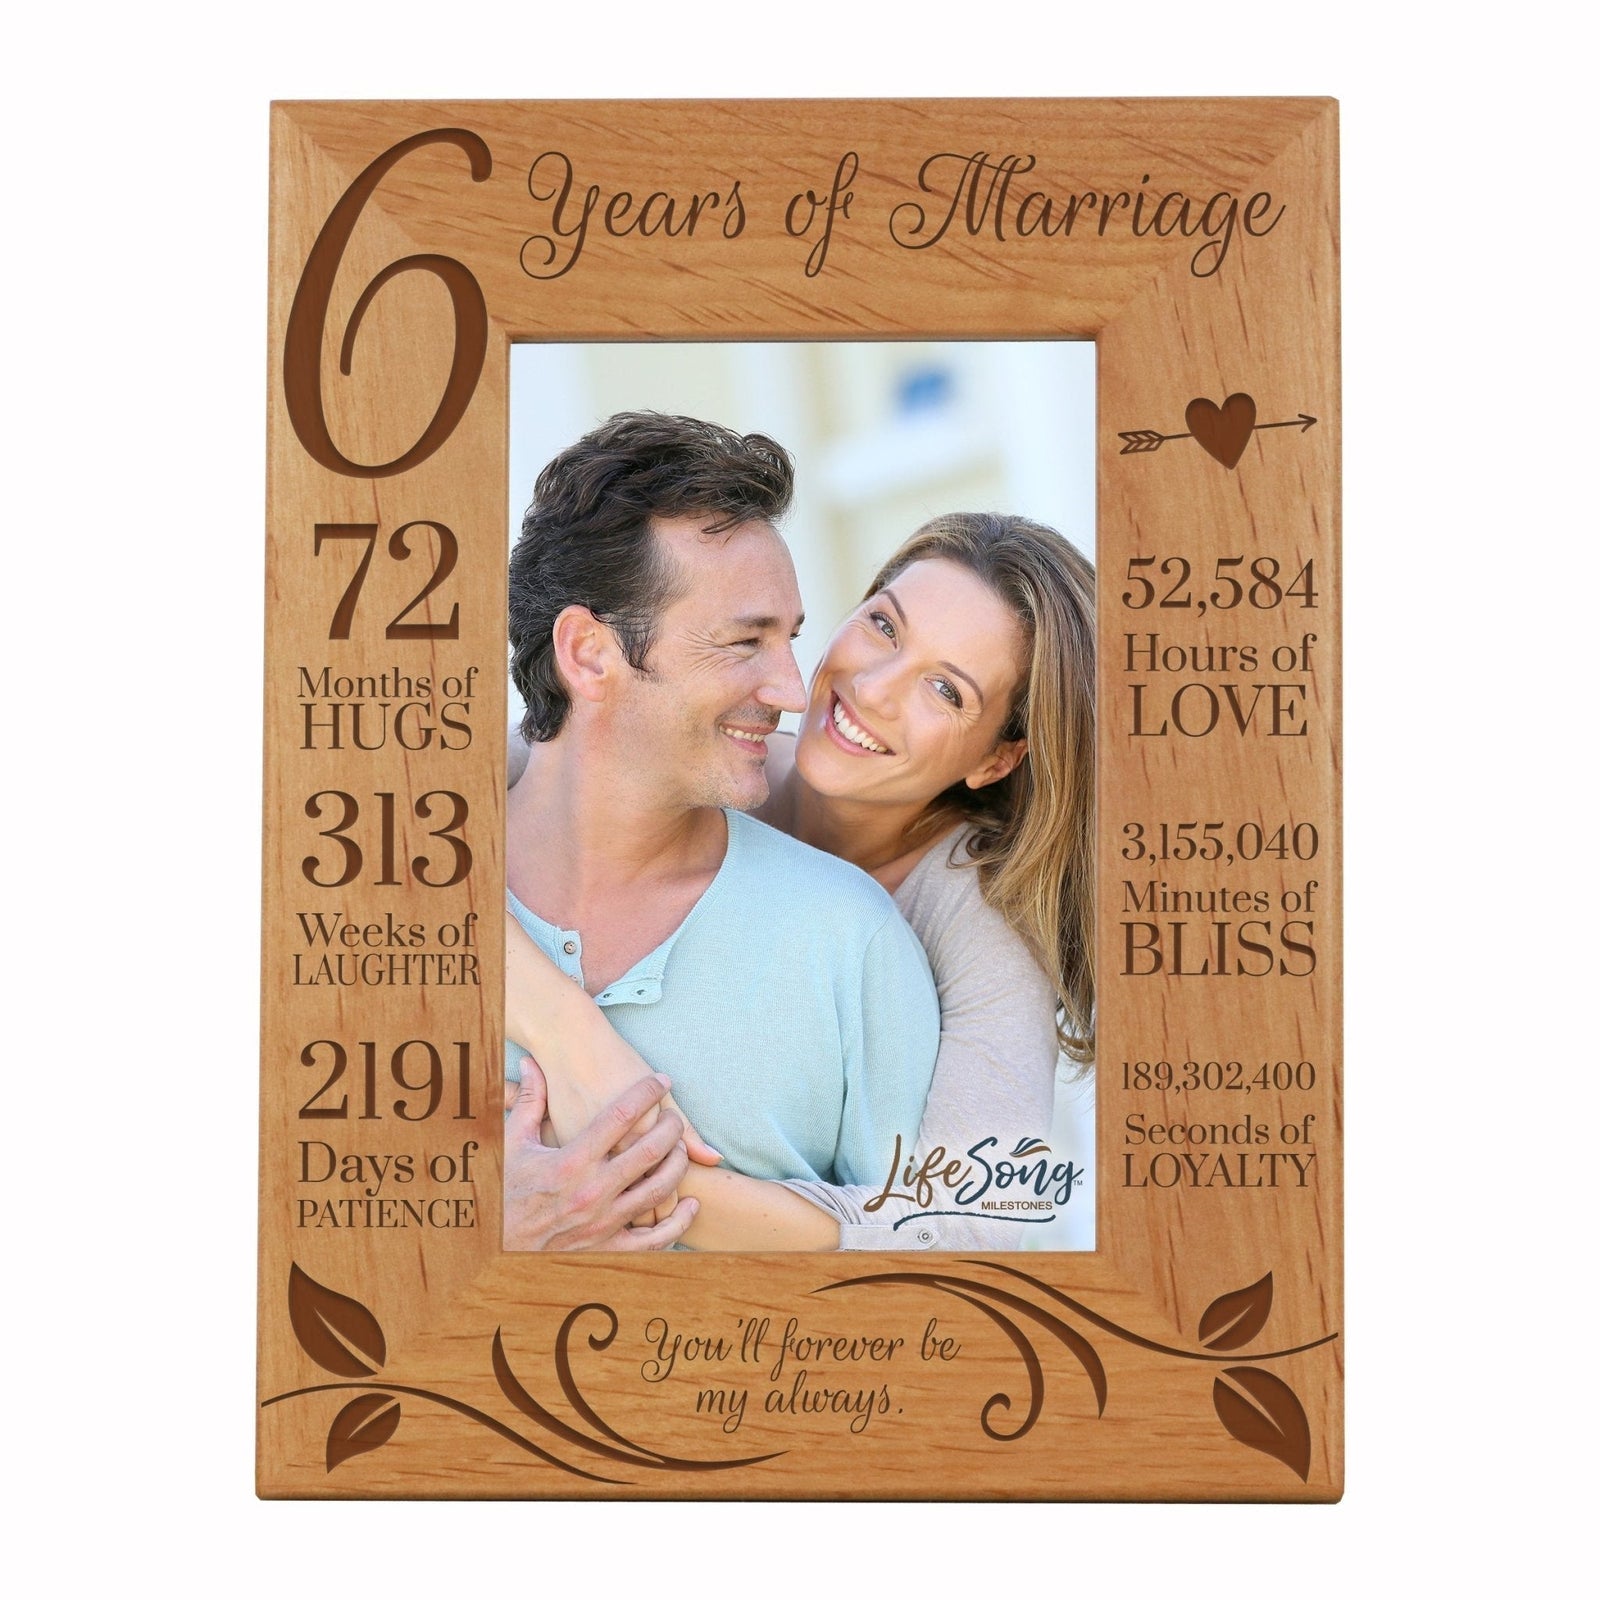 Engraved 6th Wedding Anniversary Photo Frame Wall Decor Gift for Couples - Forever Be My Always - LifeSong Milestones